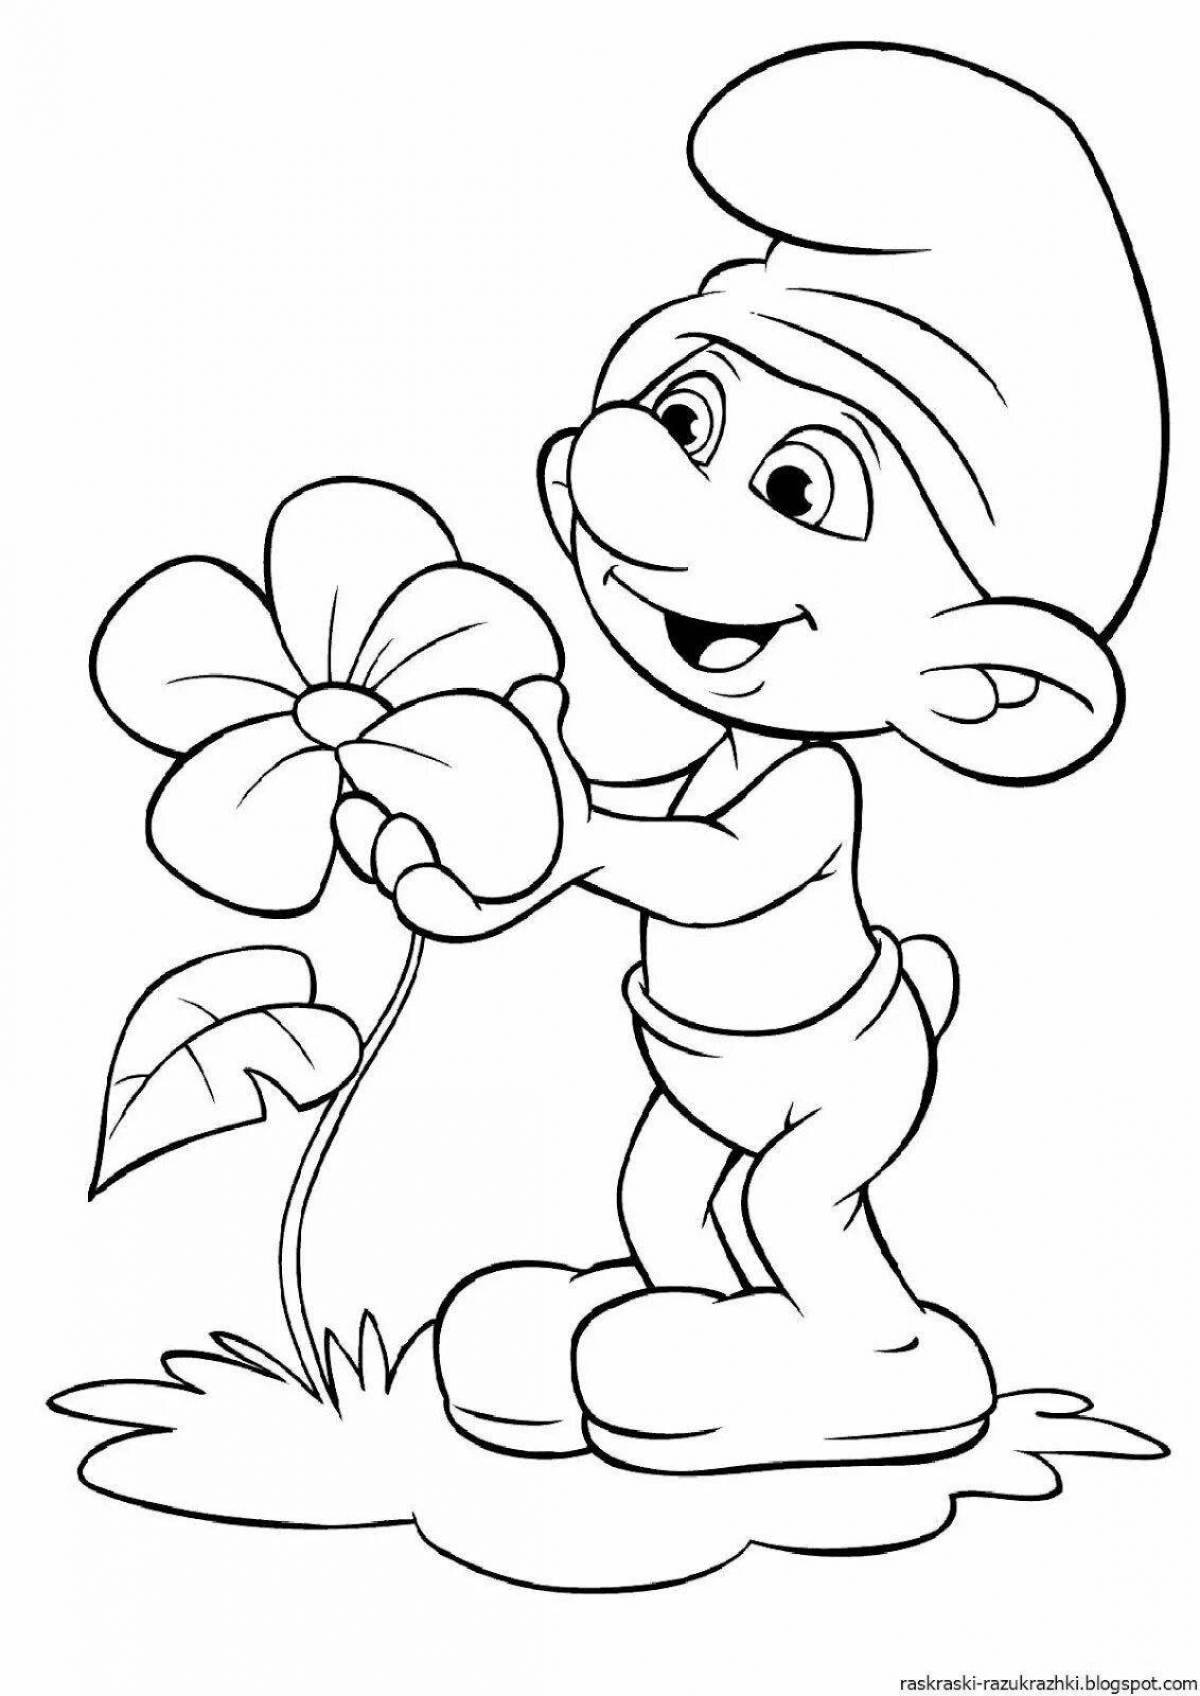 Surprise coloring book pdf for kids